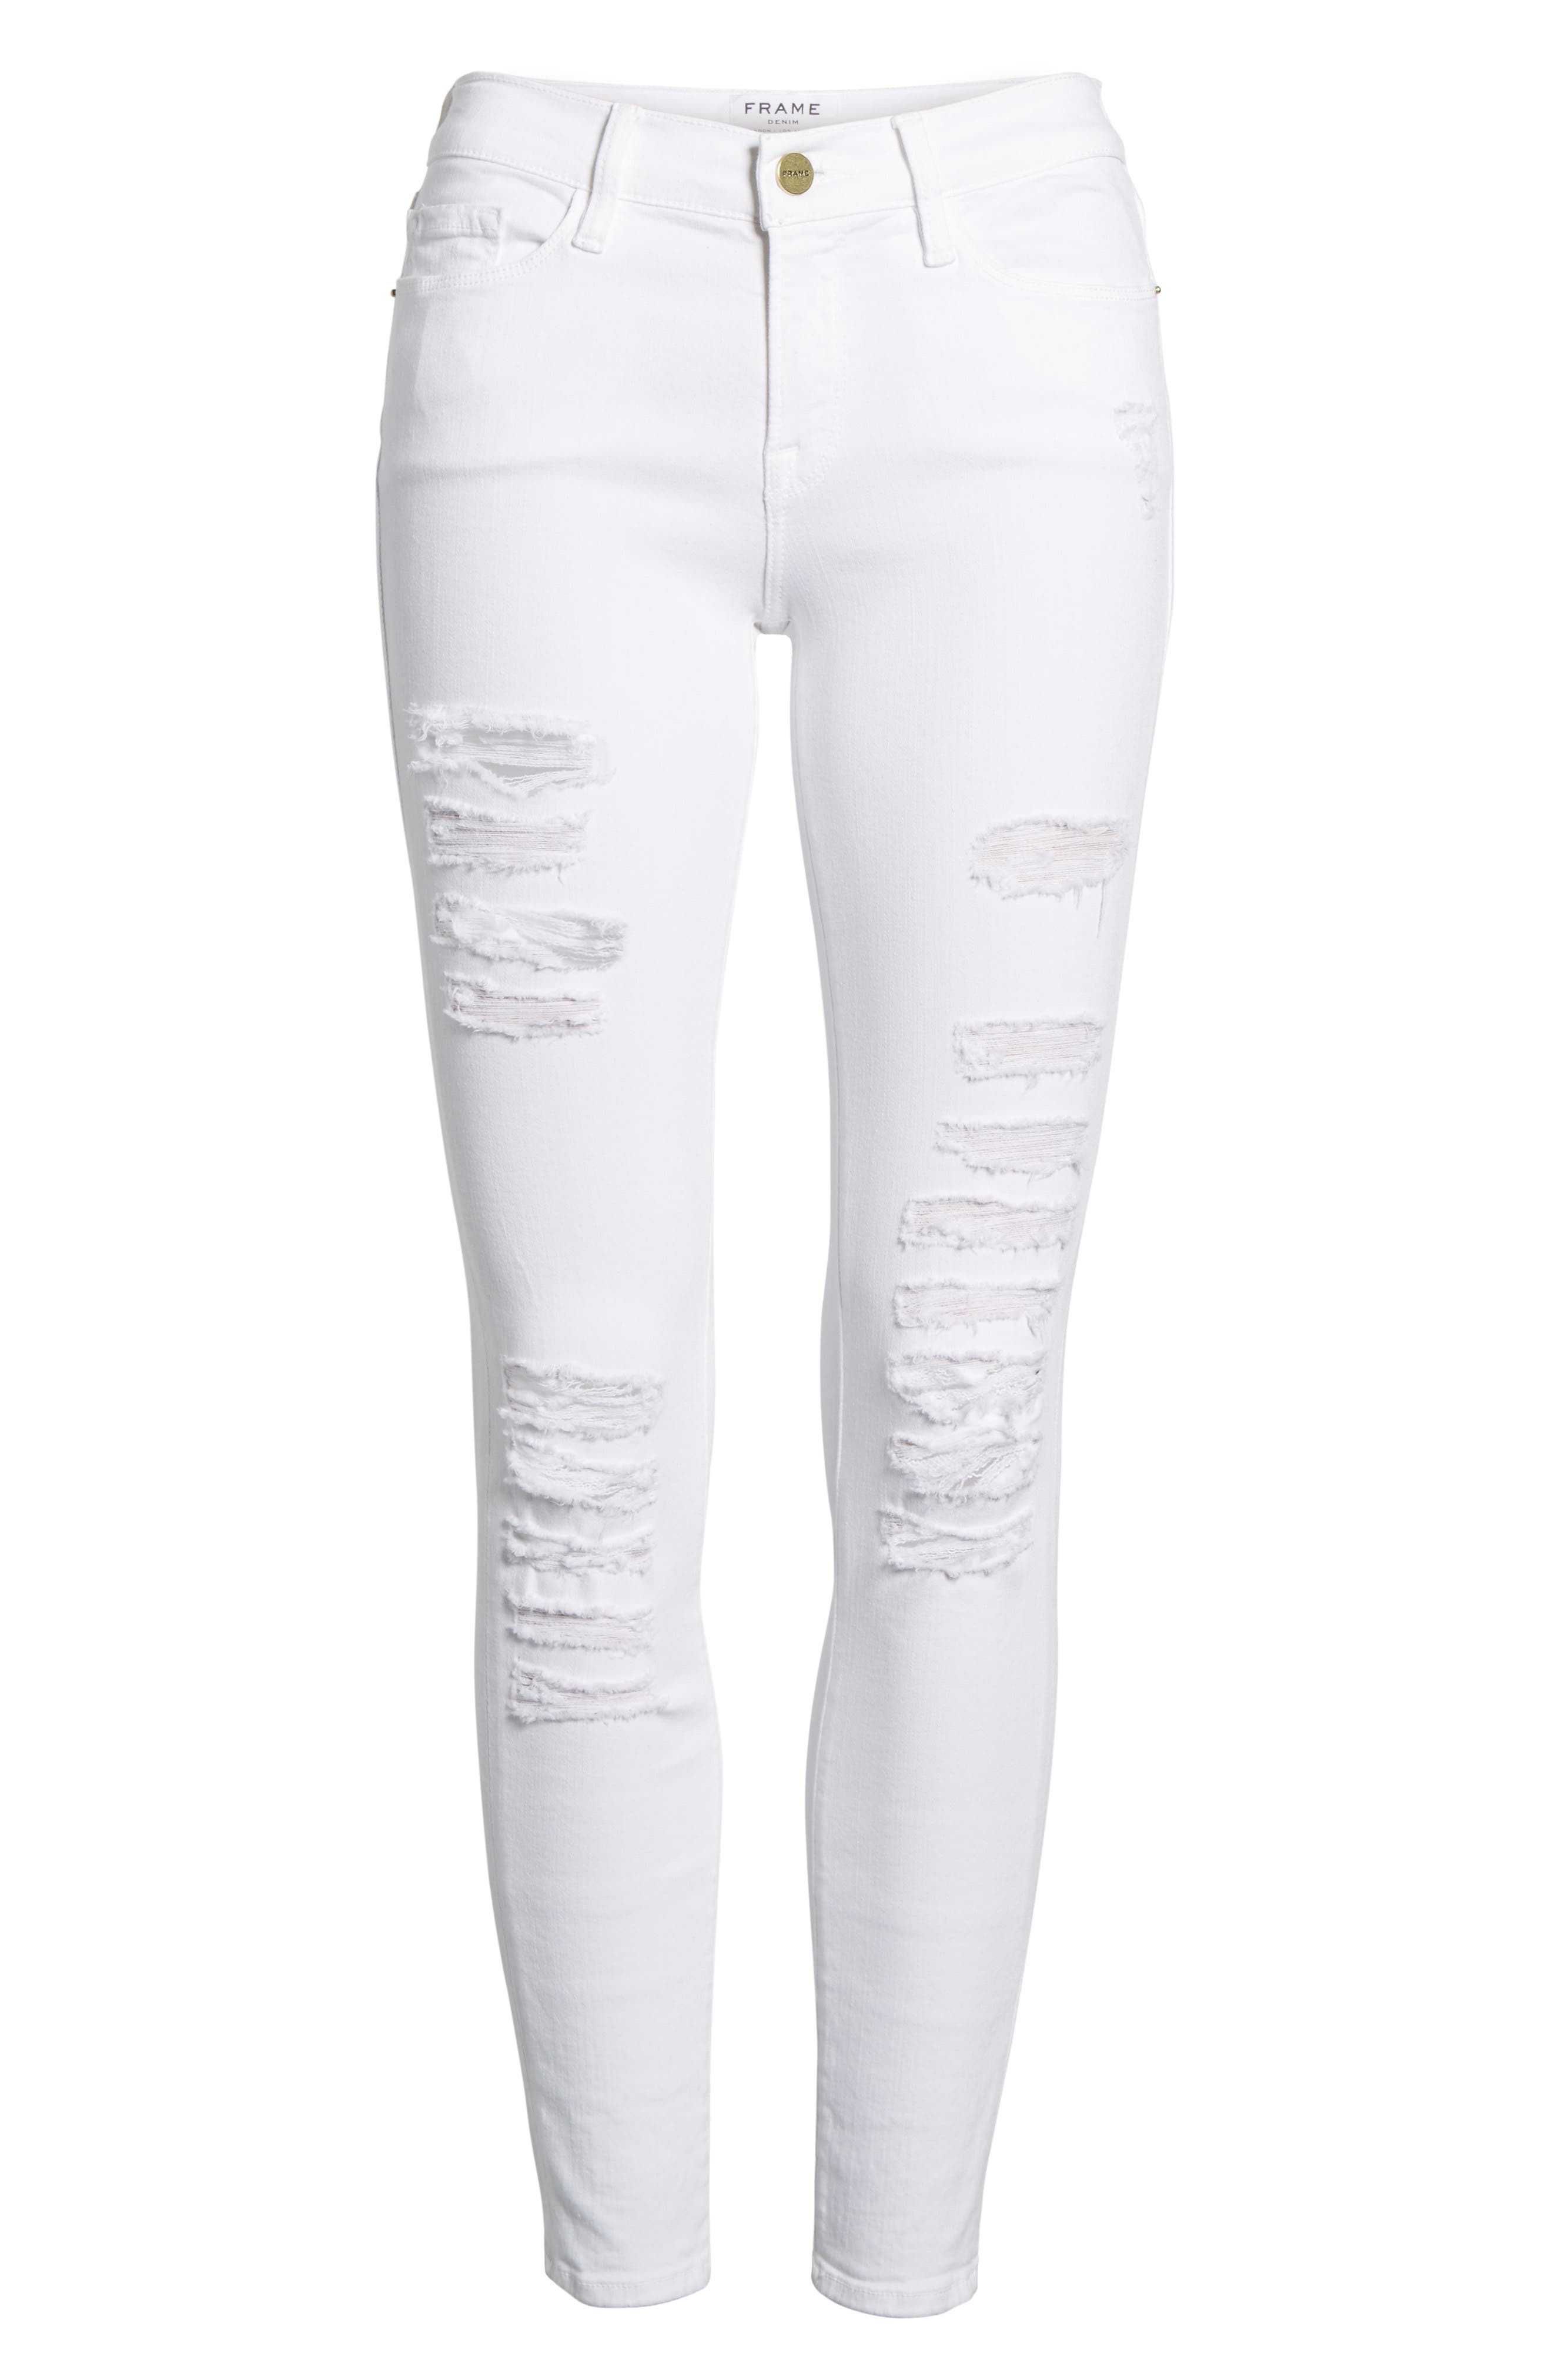 black and white skinny jeans